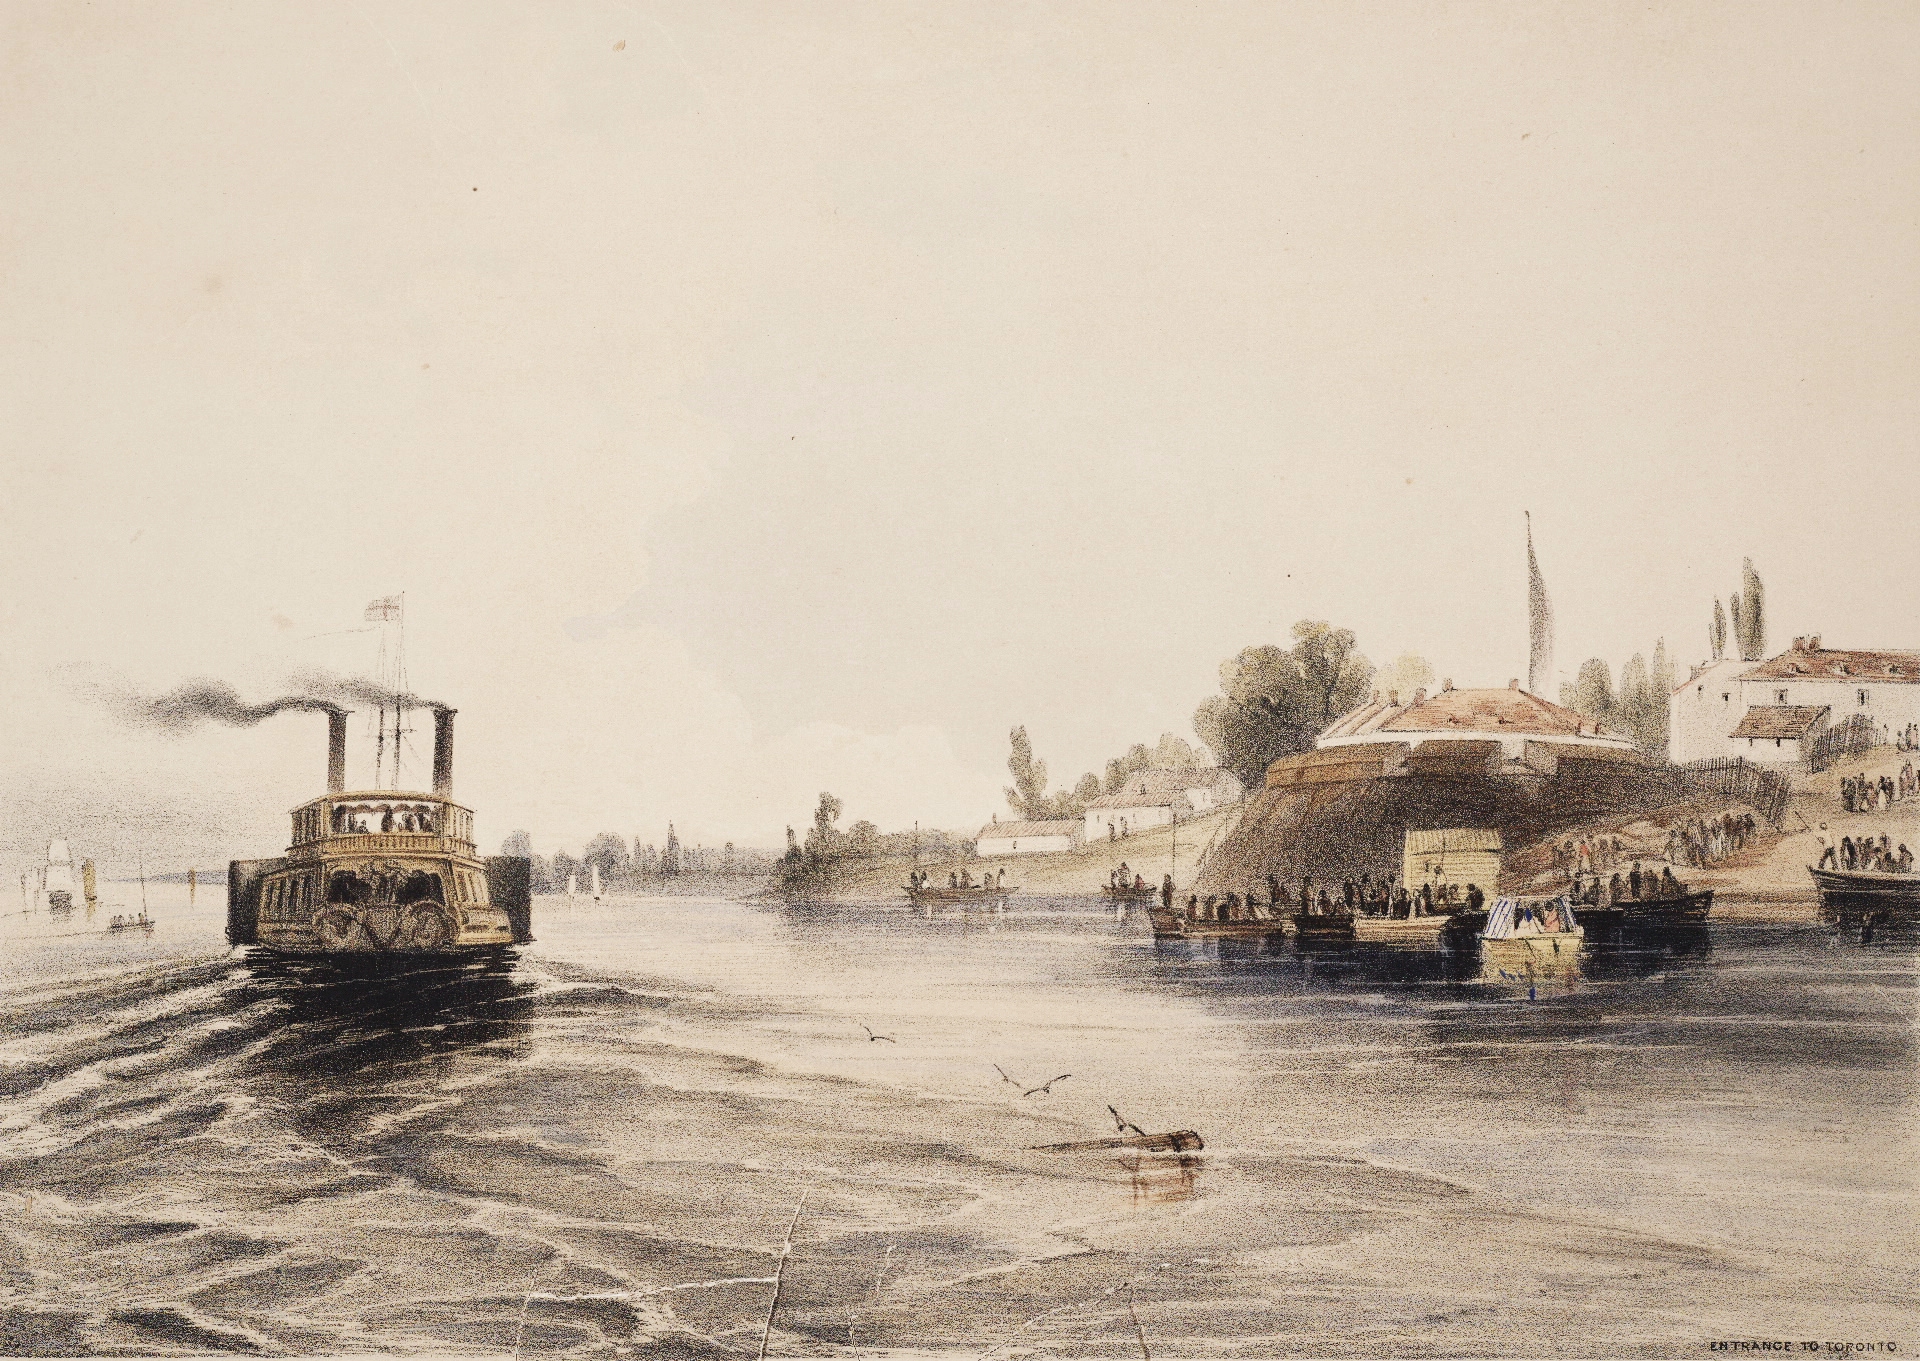 A pink-wash painting of a paddlewheel steamer with two funnels, leaving a wake as it passes fortification on the shore to starboard.